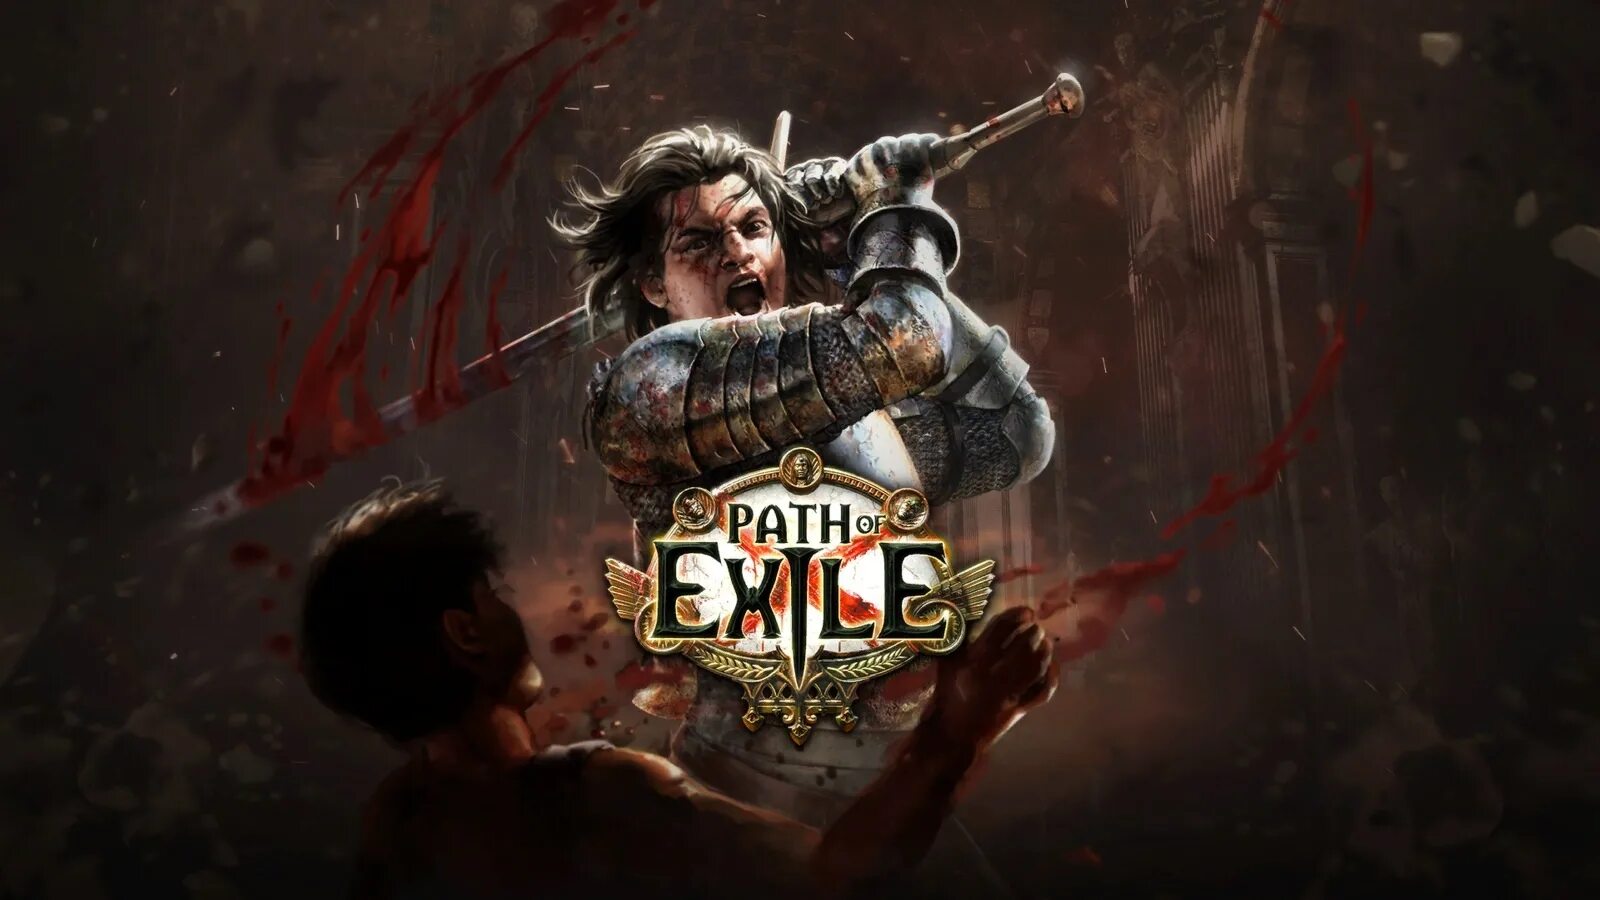 Poe steam. Path of Exile 1. Path of Exile Постер. Path of Exile обложка. Path of Exile обложка игры.